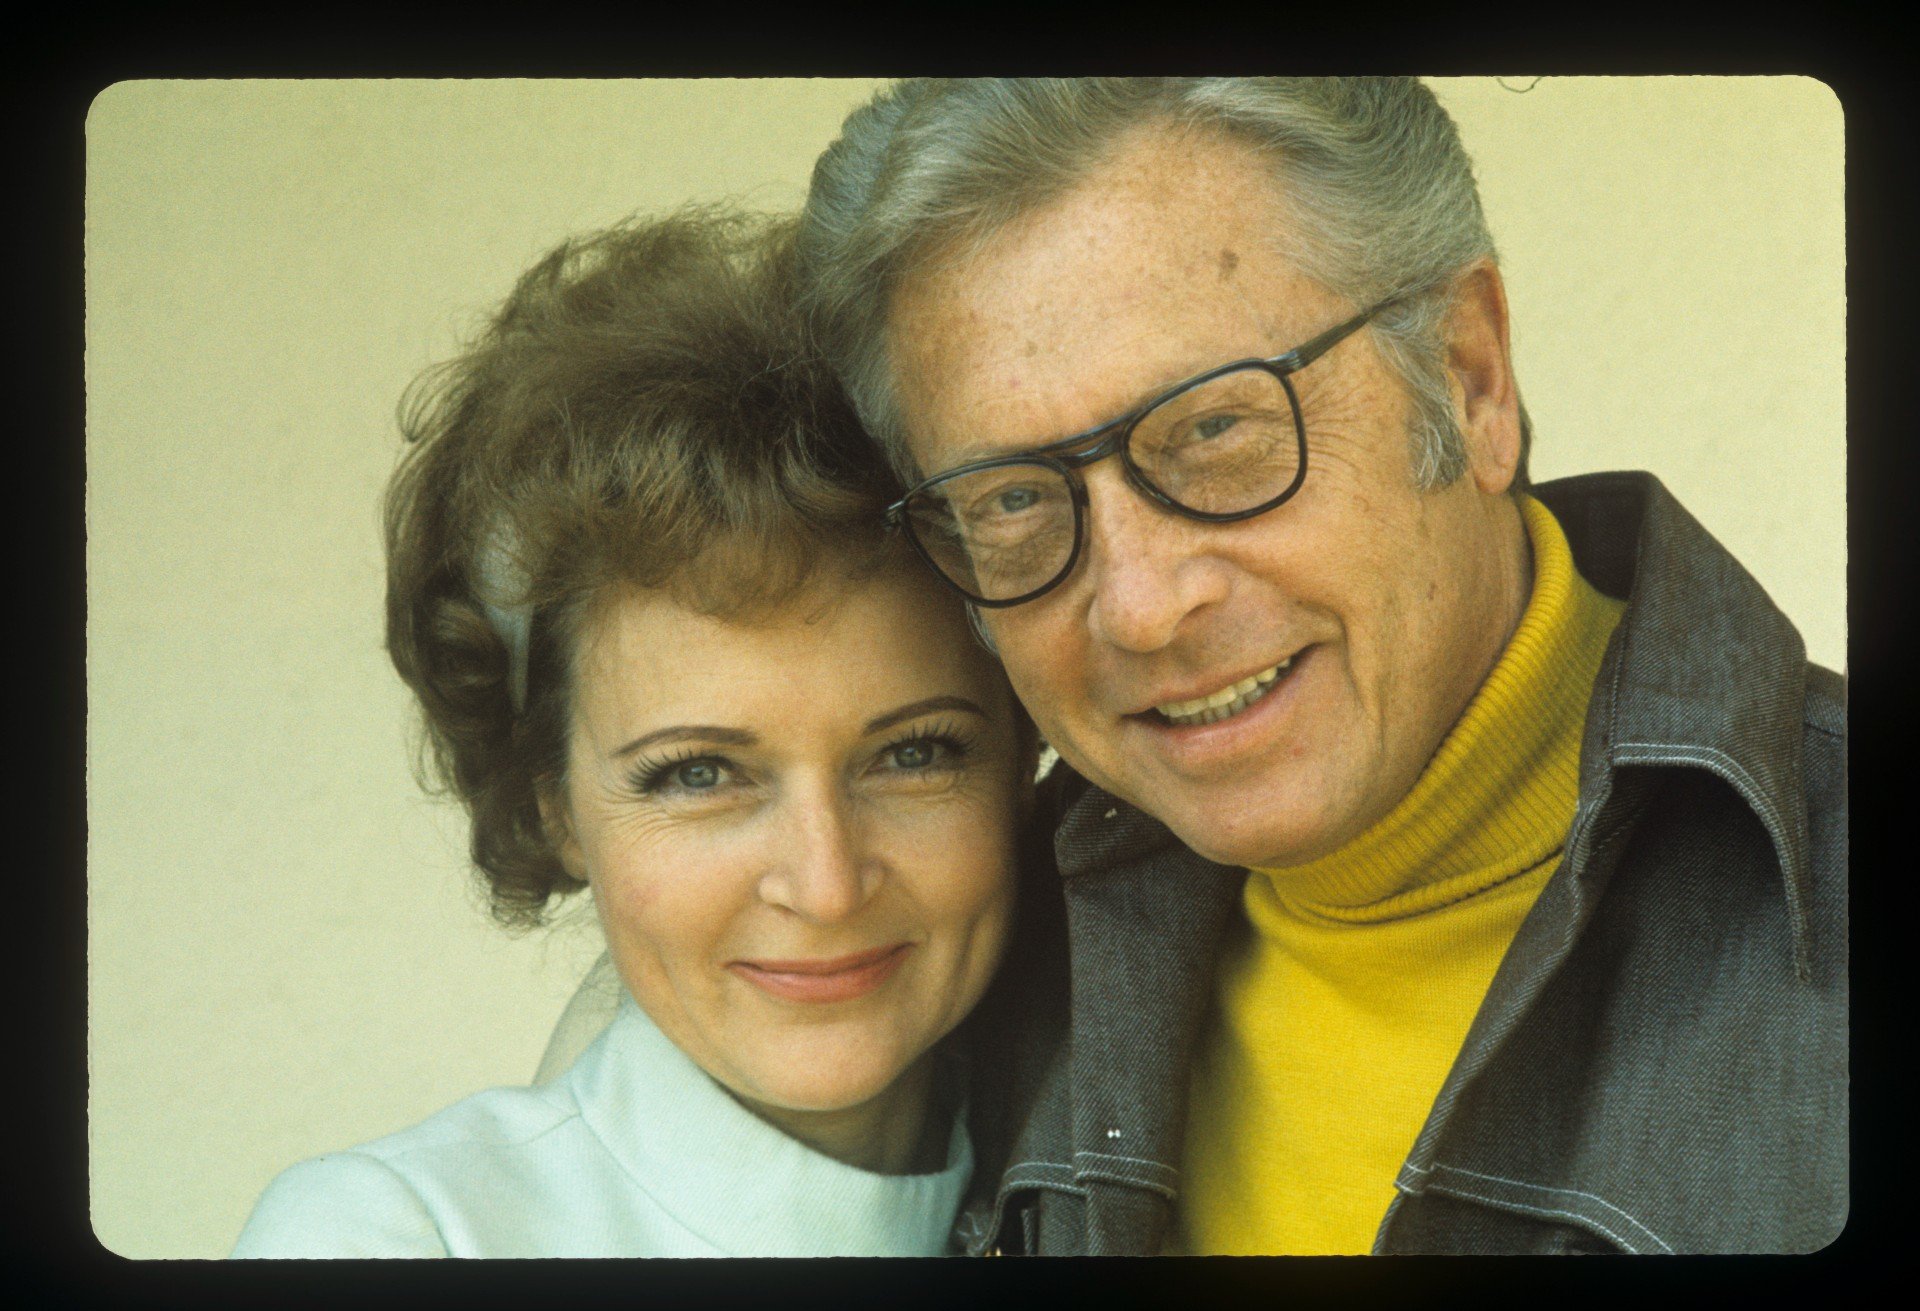 Betty White and Allen Ludden pose together and smile